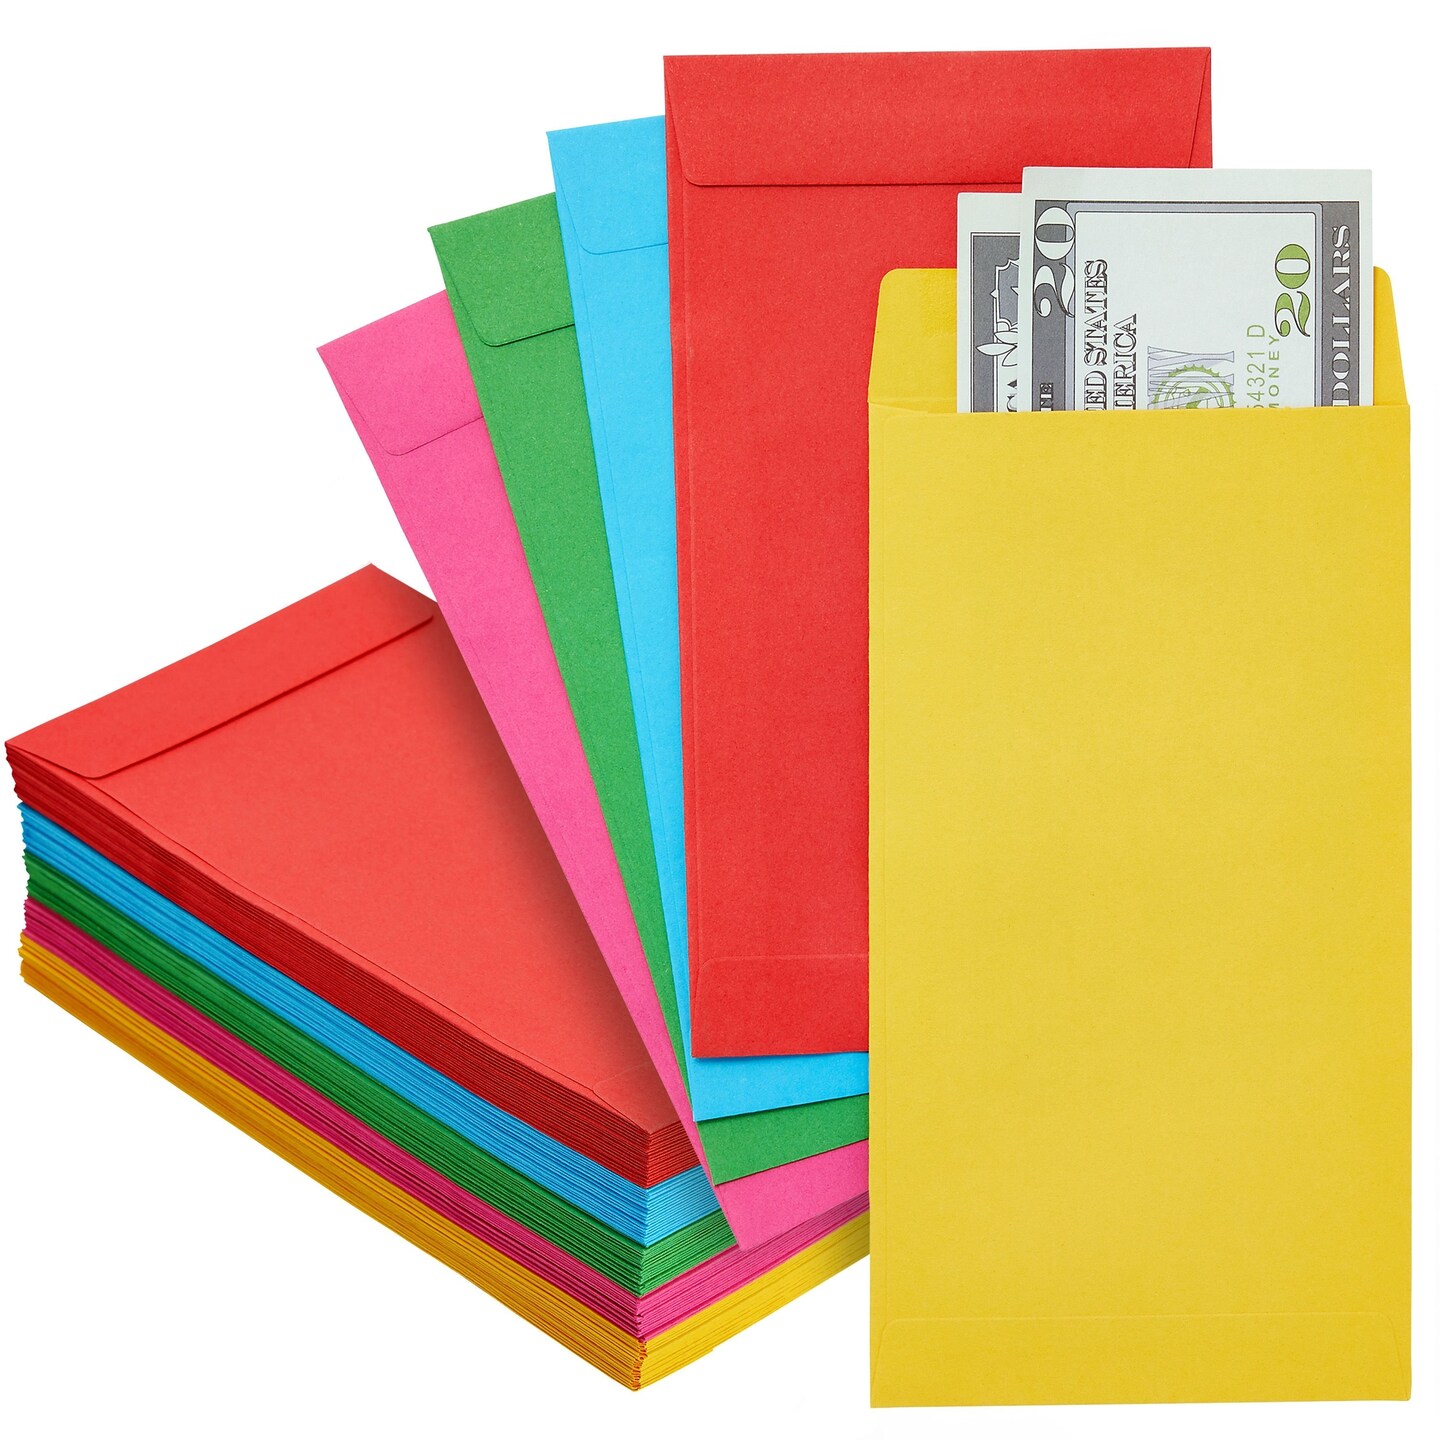 100 Pack Colorful Money Envelopes for Cash 3.5x6.5 inch, #7 Budget Envelopes for Payroll, Money Saving, Coins, Currency, 100GSM